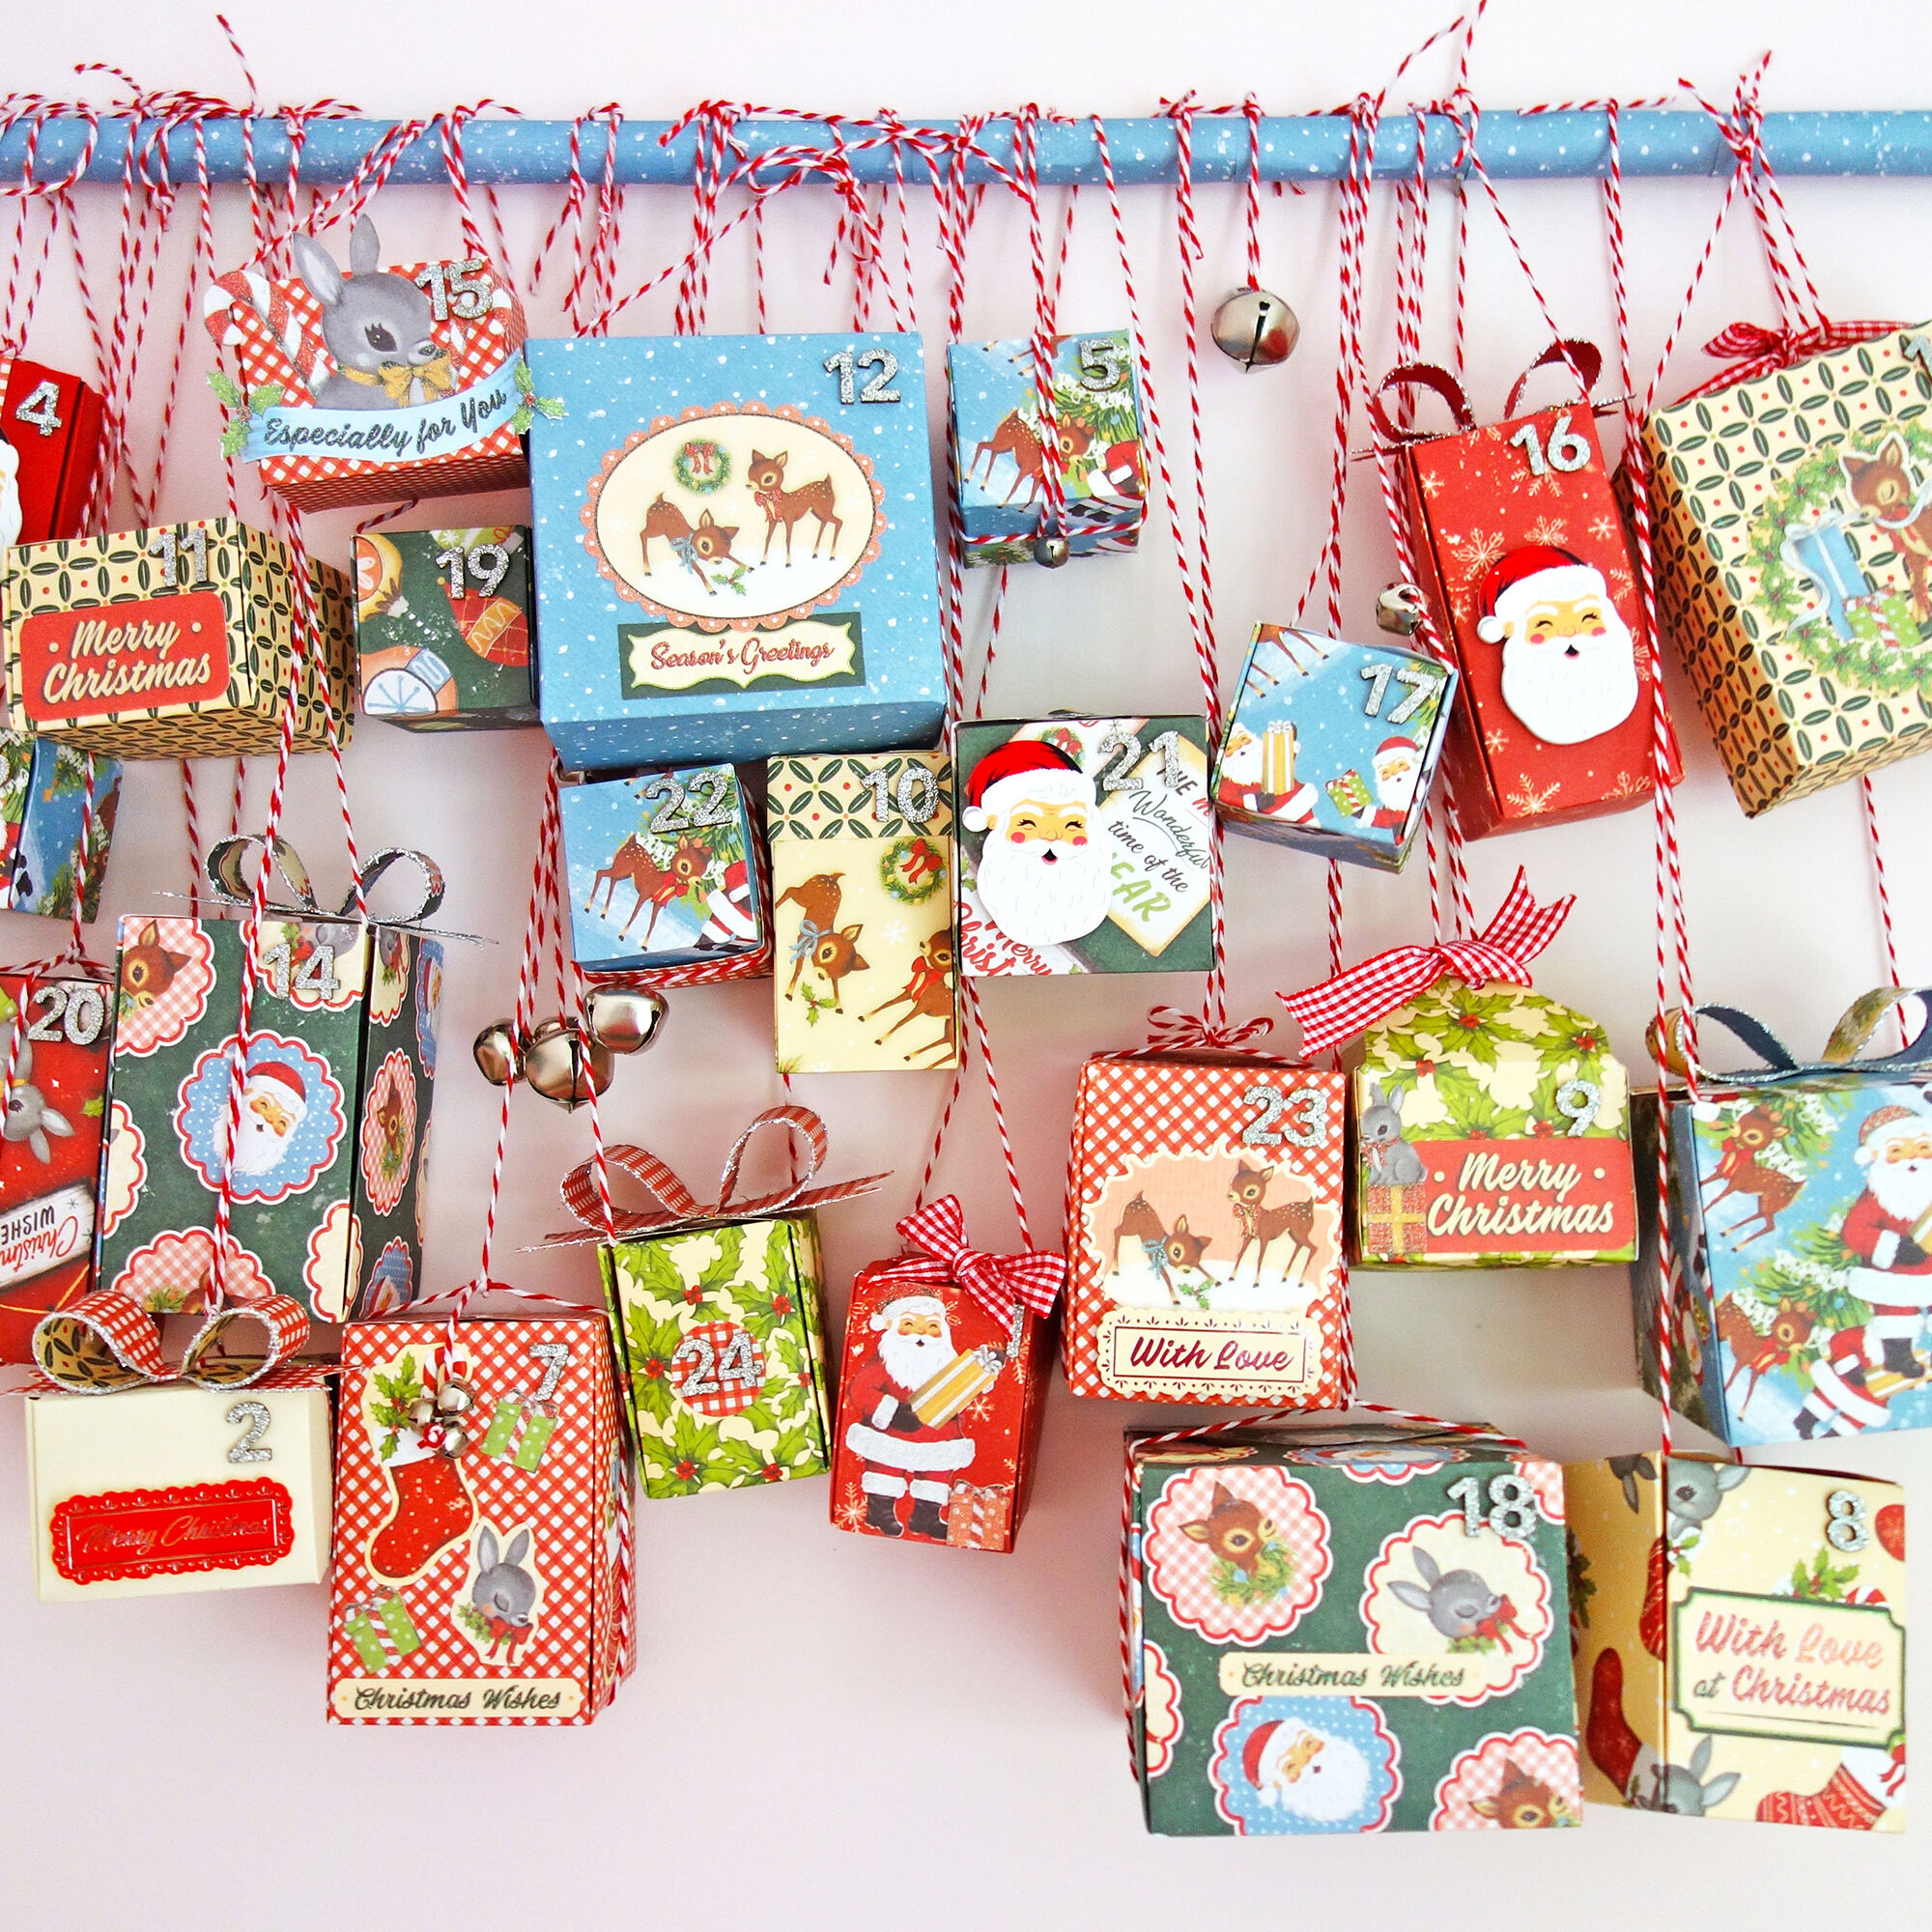 Homemade Advent Calendars | Ideas On Gifts, Activities & Display